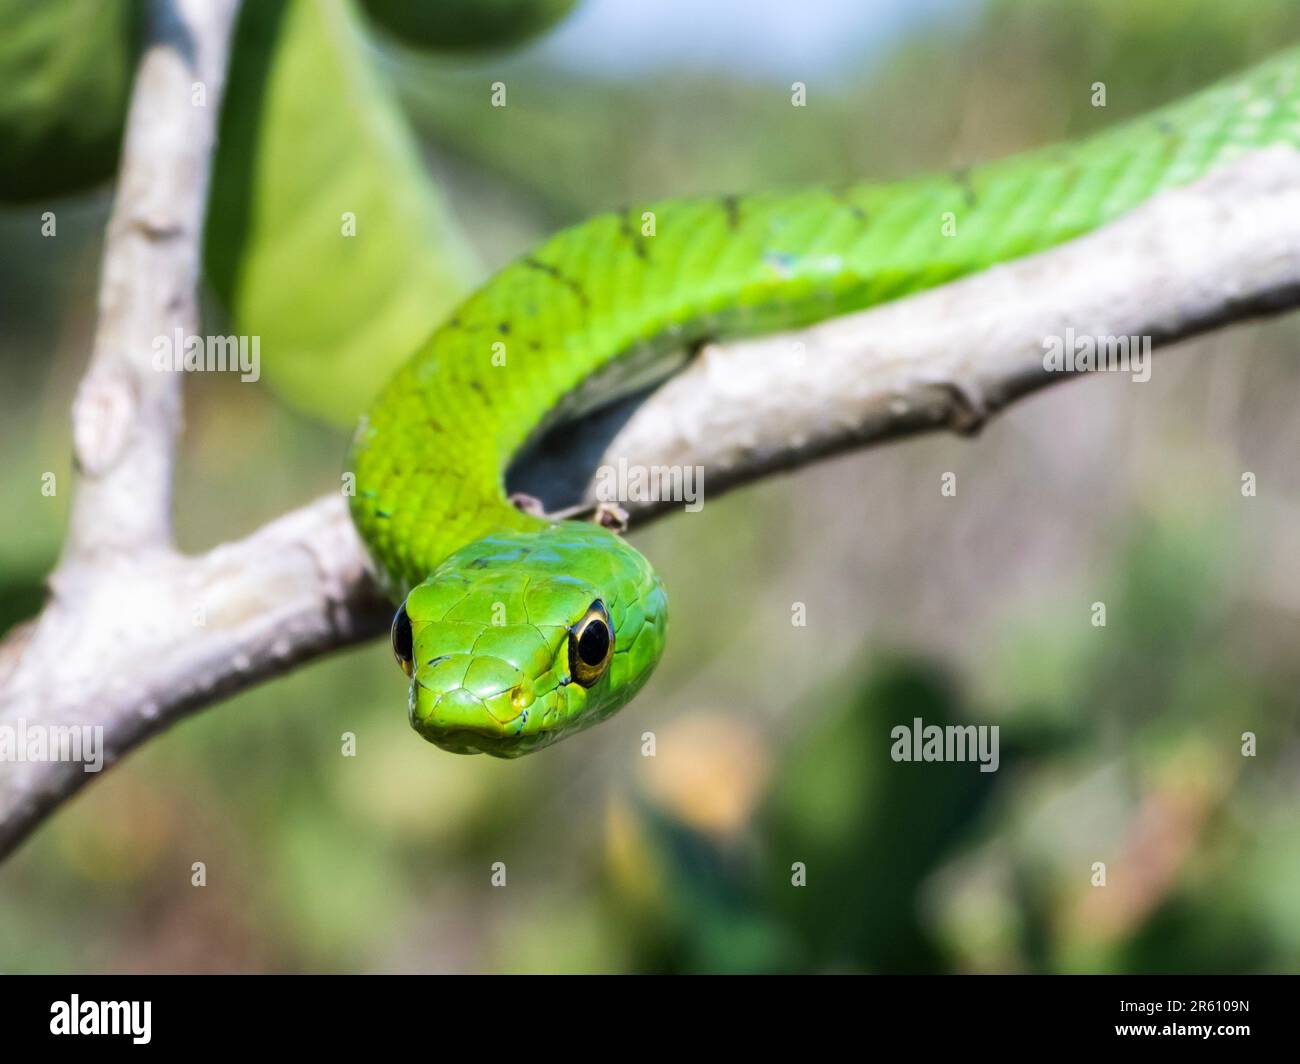 A closeup of a green snake on a tree branch Stock Photo